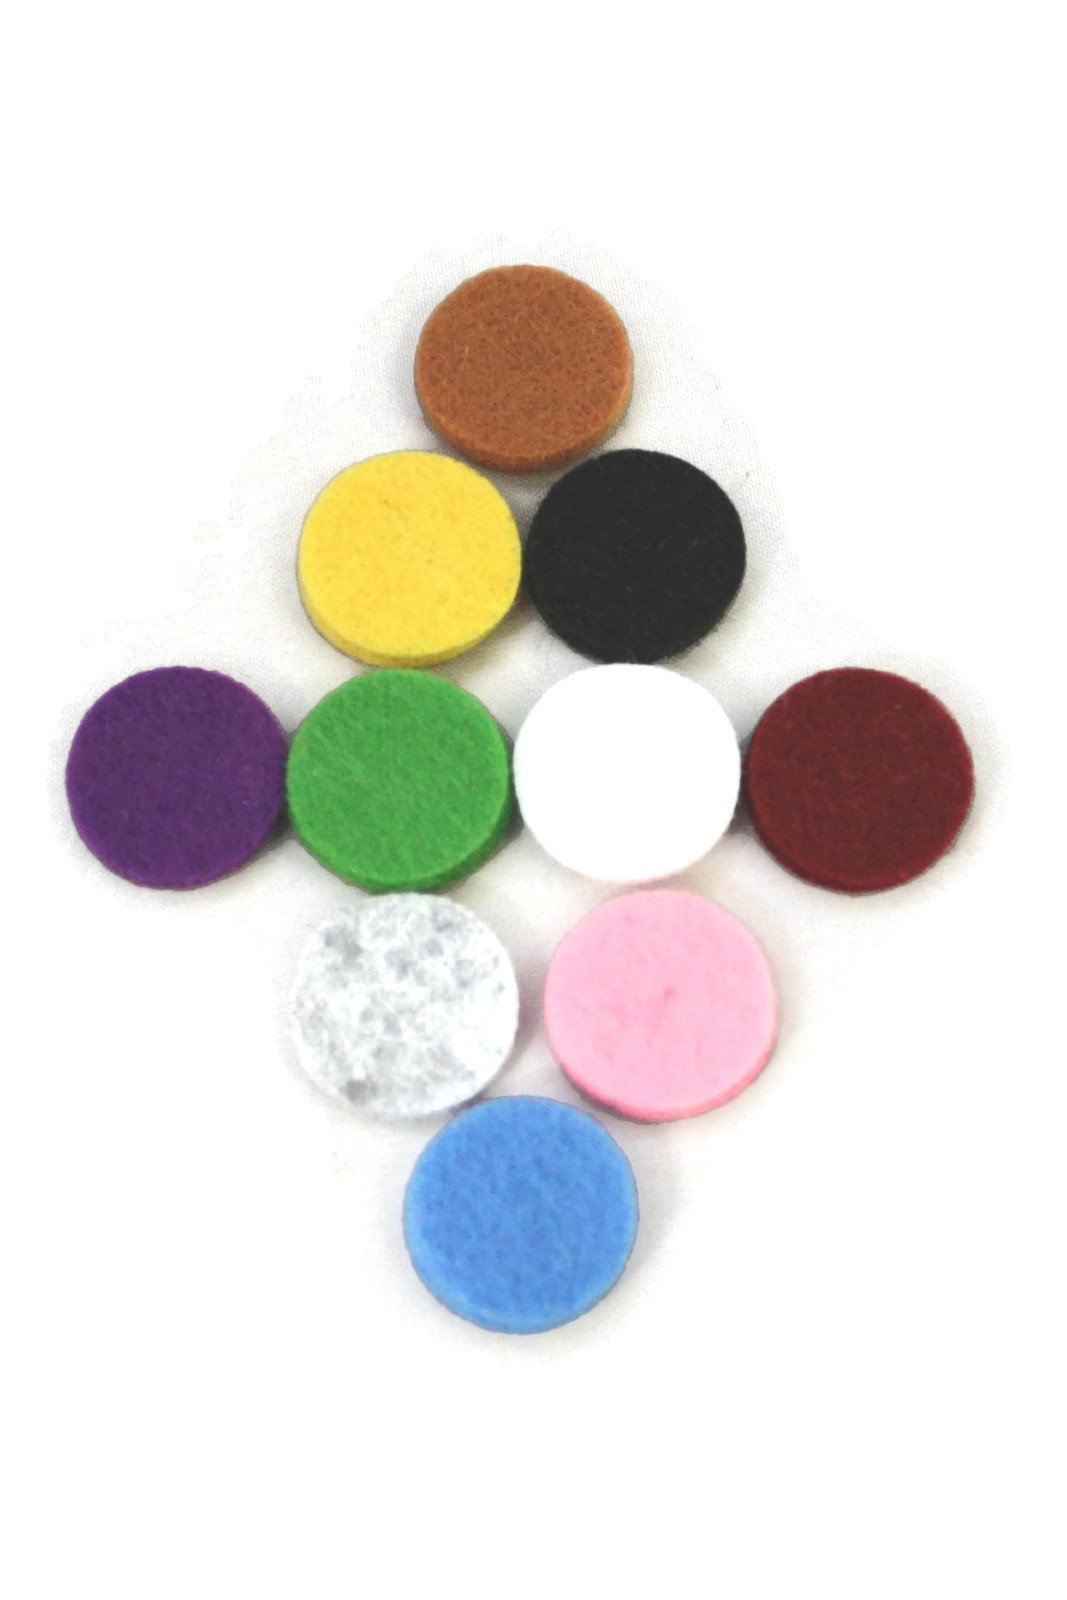 17.5mm Replacement Pads for 25mm Diffuser Pendants- Set of 10-Diffuser Necklace-Destination Oils